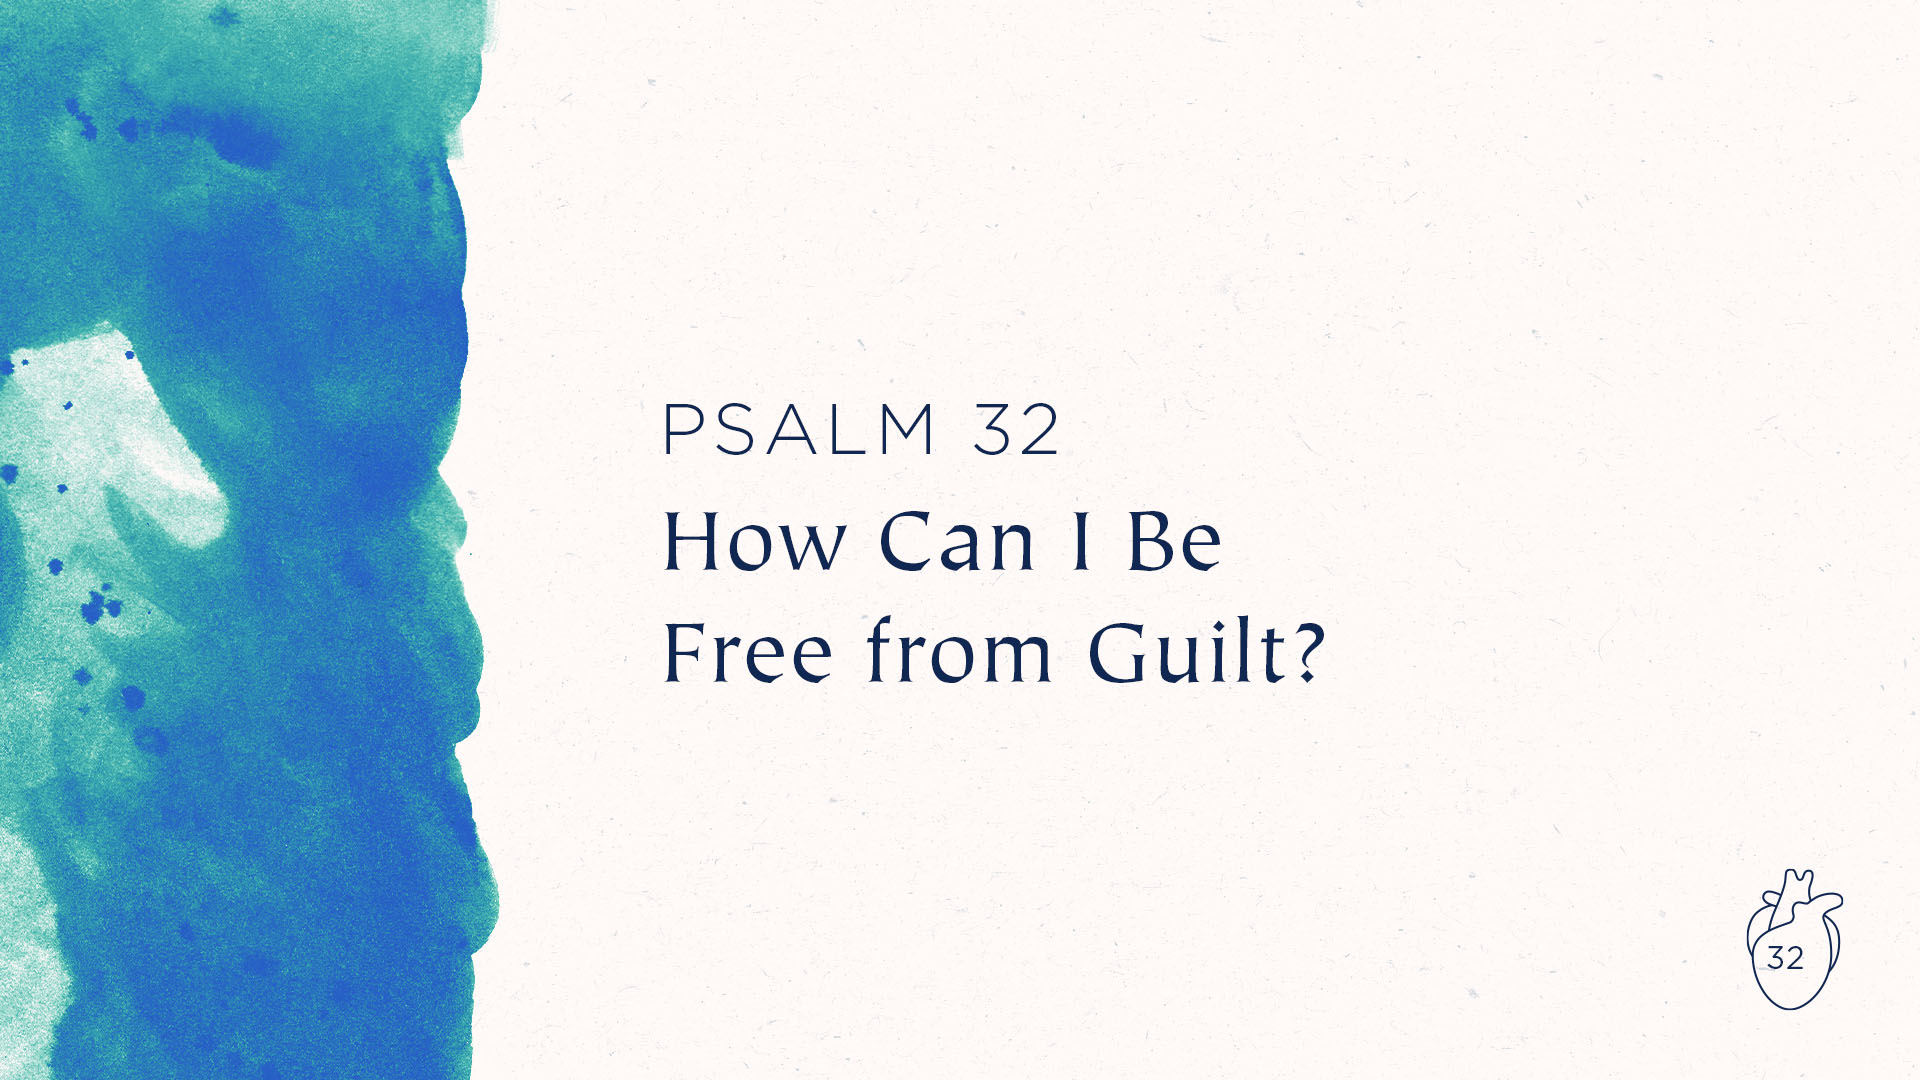 How Can I Be Free from Guilt?